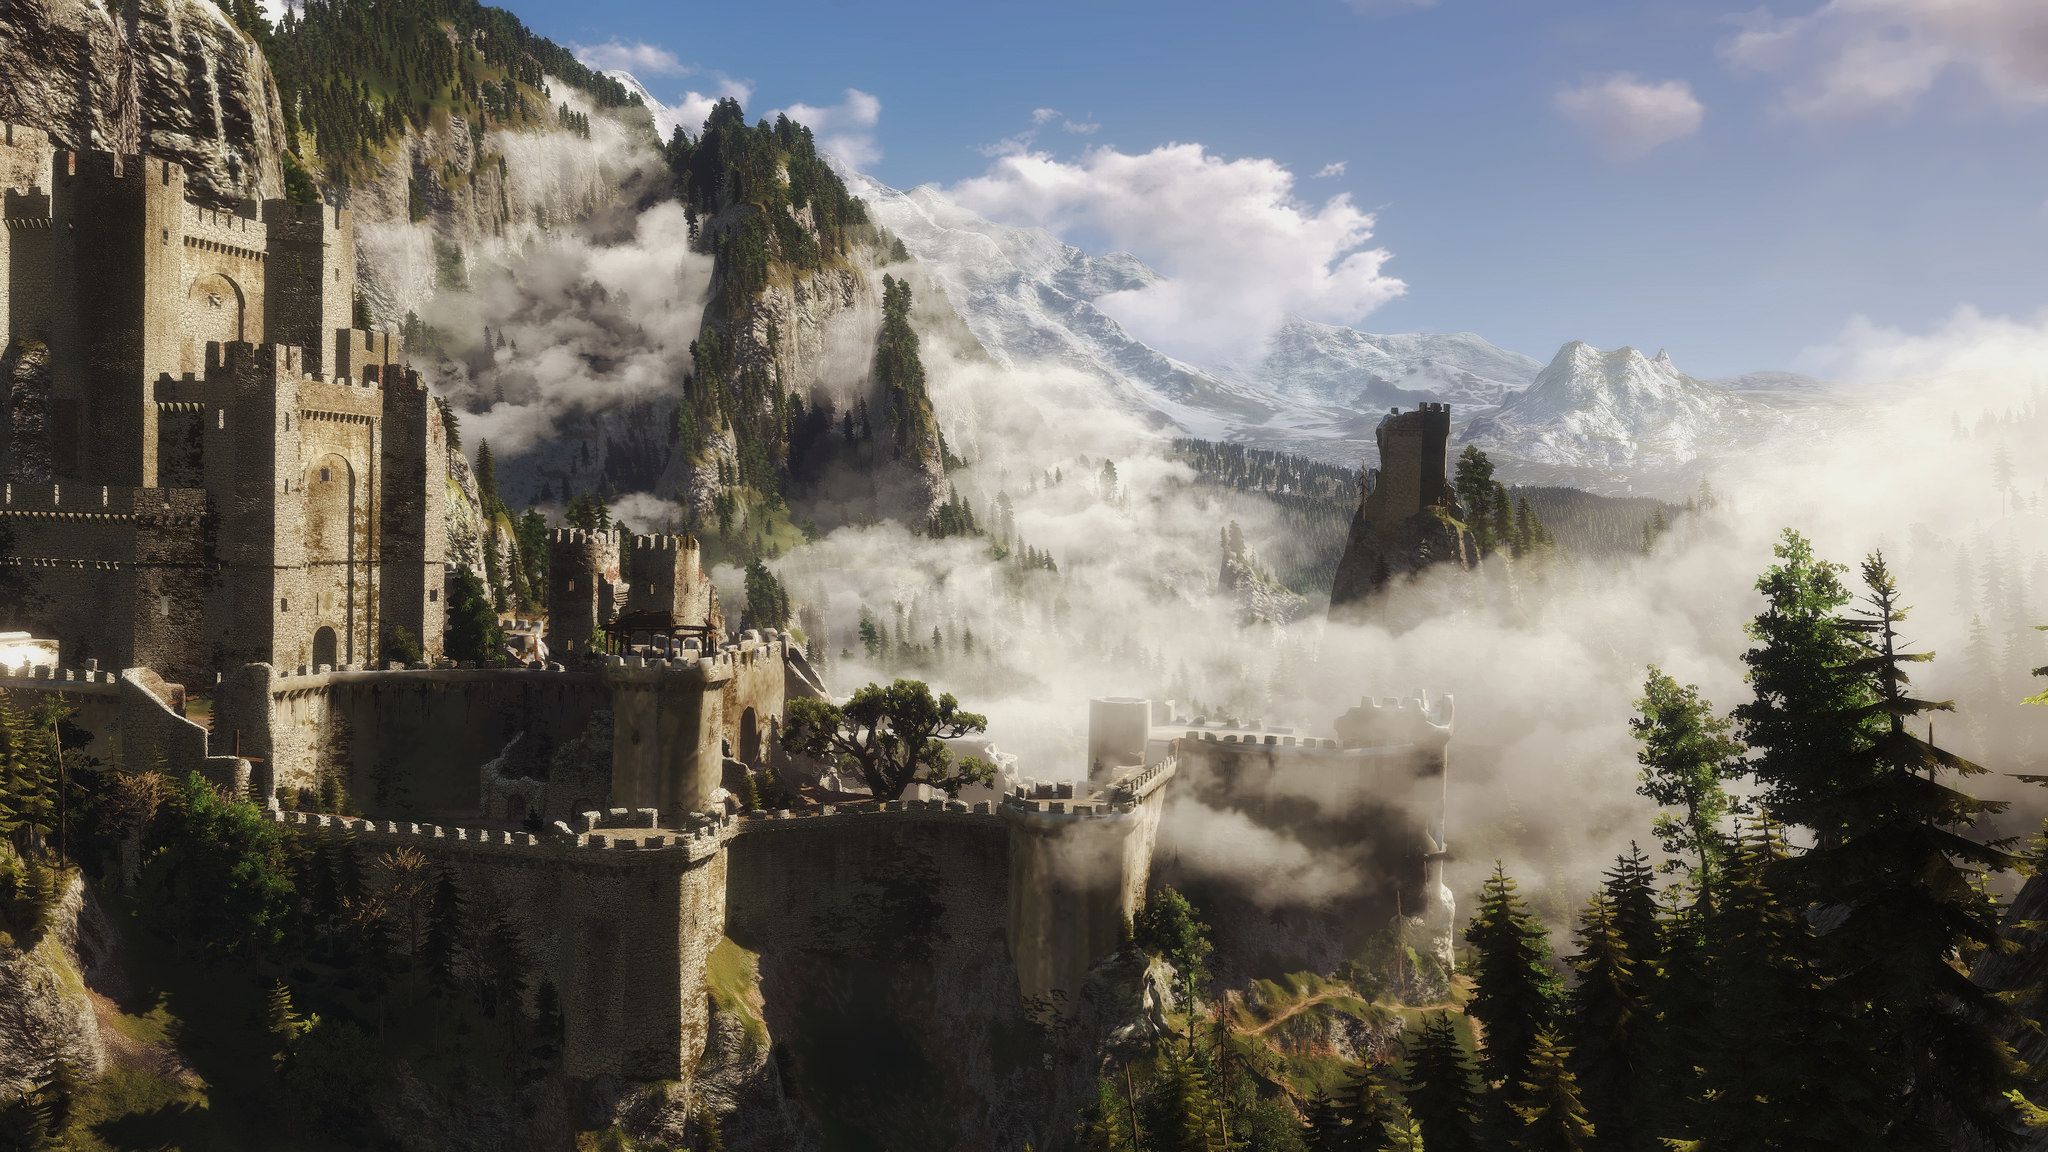 Kaer Morhen in 2020 | The witcher 3, The witcher, Fantasy places